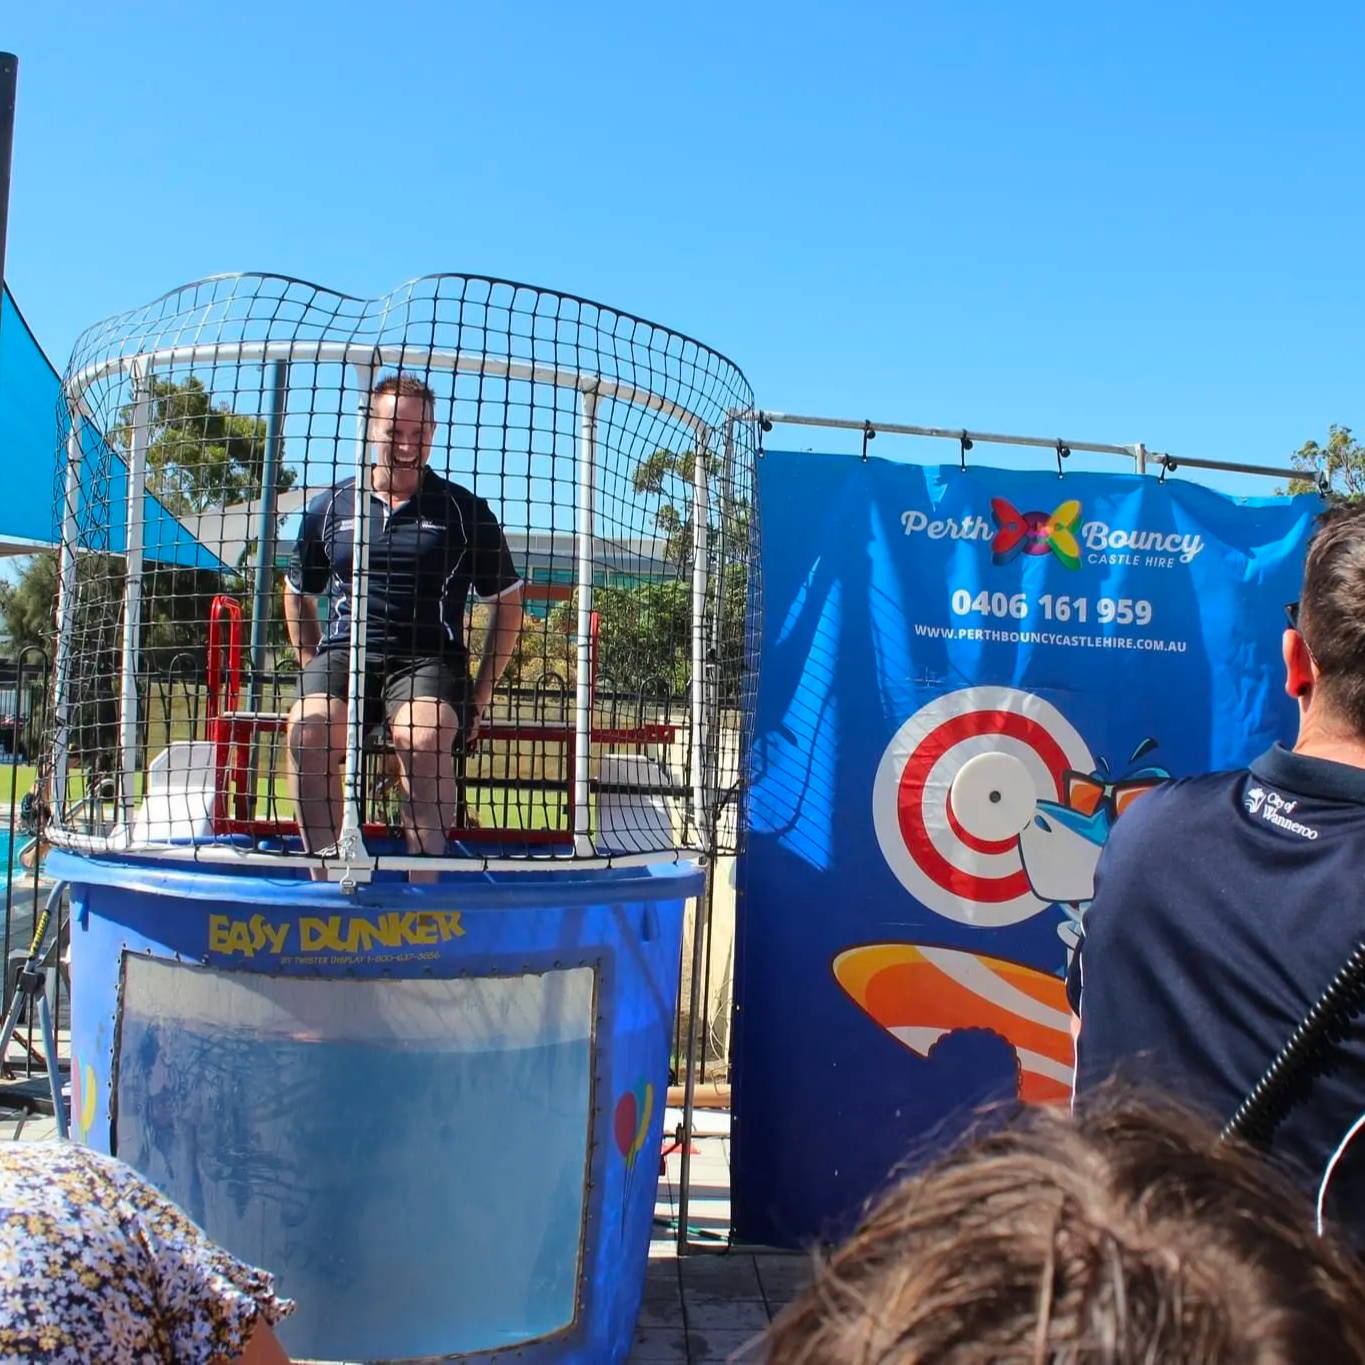 A dunk tank challenge with teachers and kids